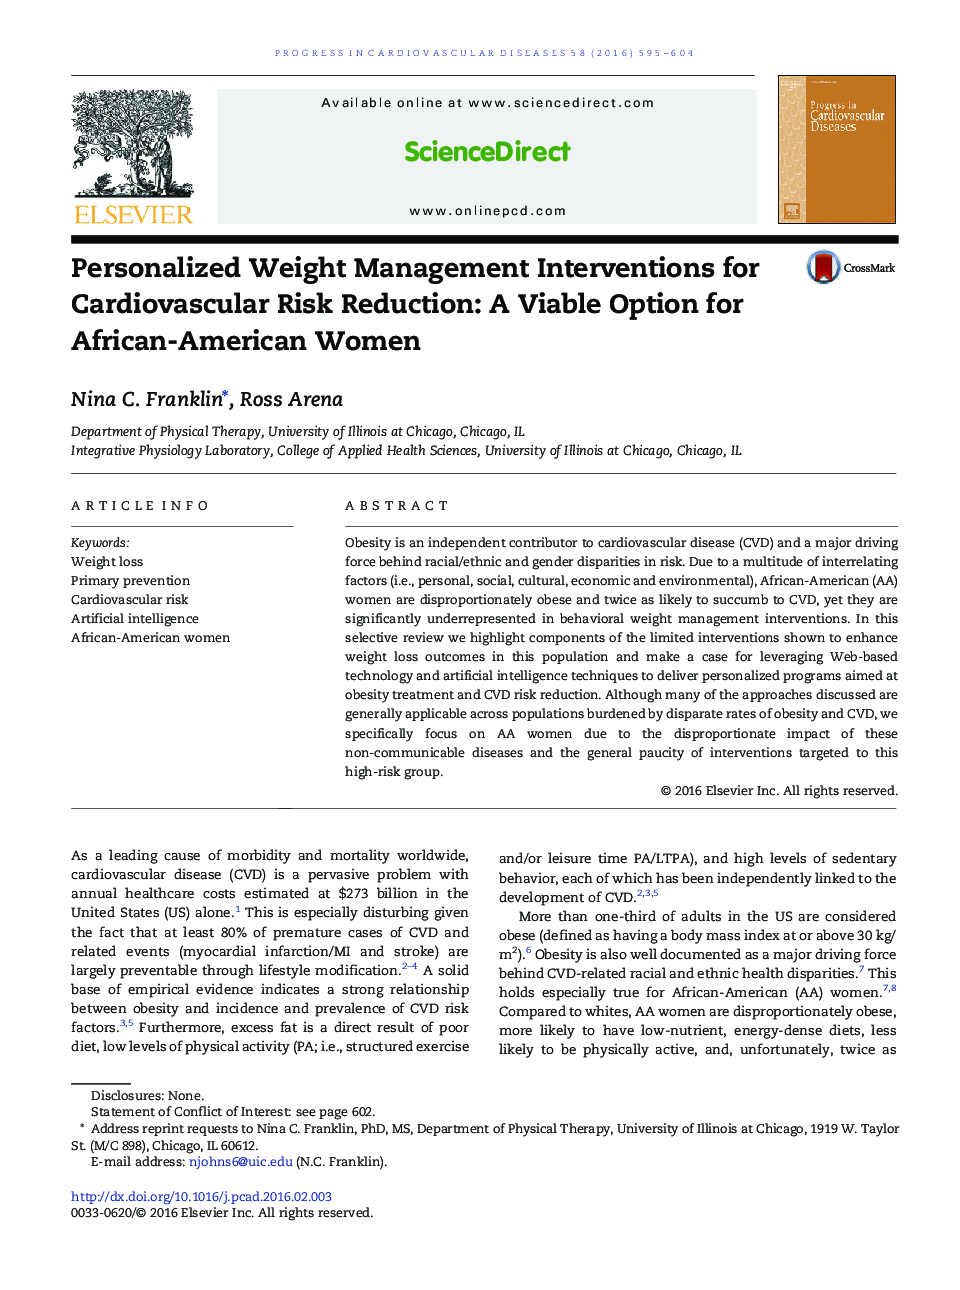 Personalized Weight Management Interventions for Cardiovascular Risk Reduction: A Viable Option for African-American Women 